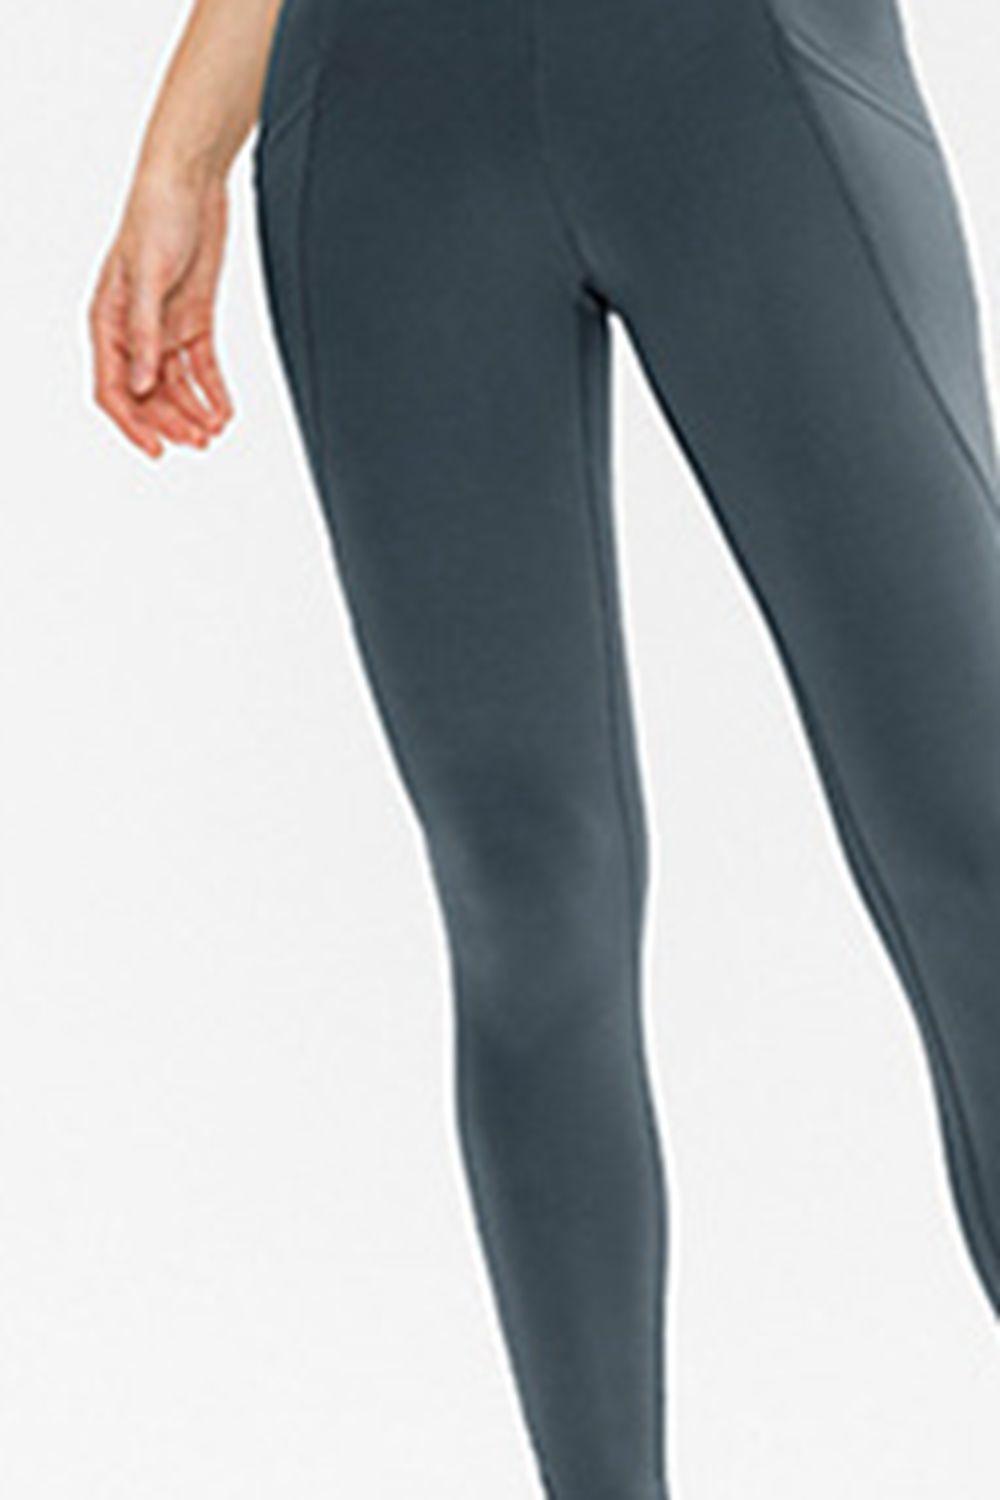 Slim Fit Long Active Leggings with Pockets - Lab Fashion, Home & Health